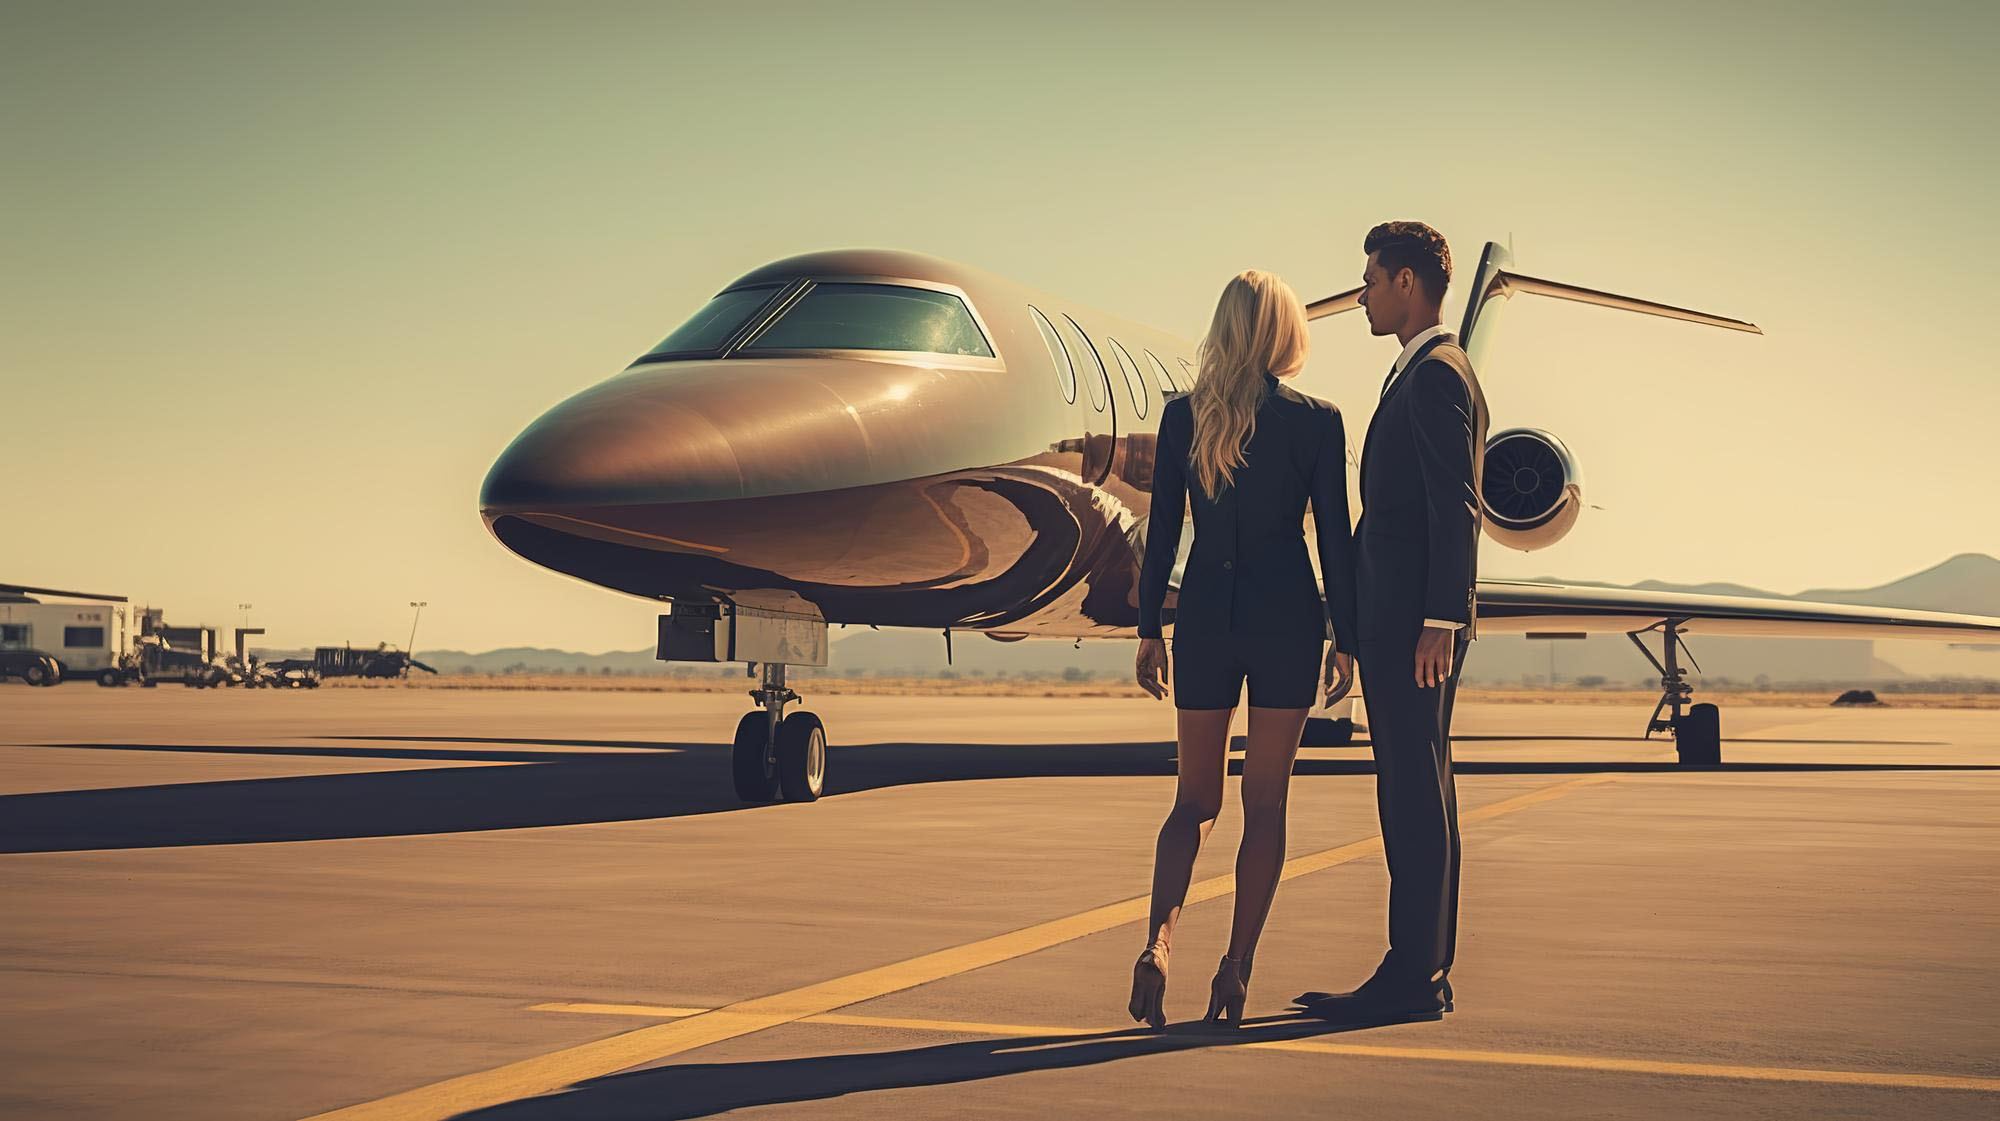 private jets - The main difference between Part 91 and Part 135 operations largely has to do with the safety standards and regulations that go into the flight.